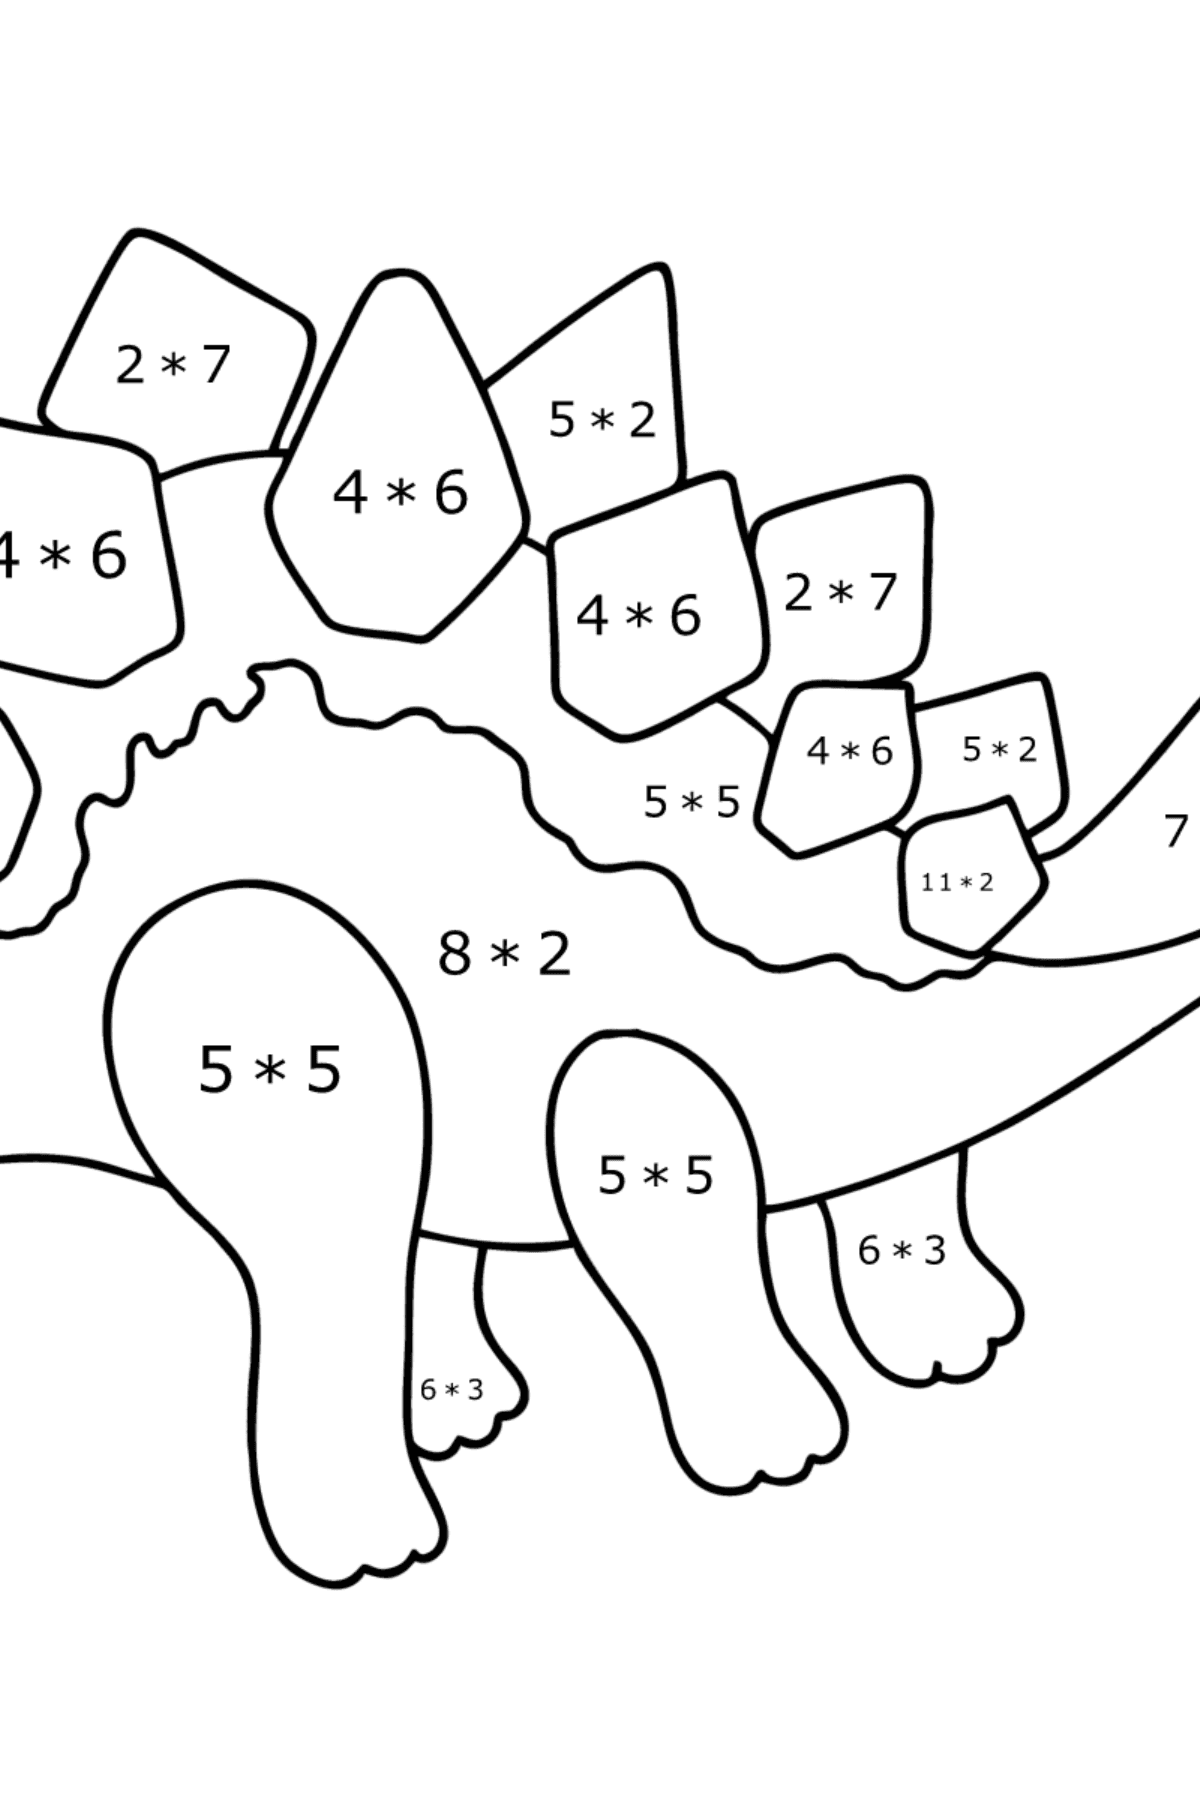 Stegosaurus coloring page - Math Coloring - Multiplication for Kids